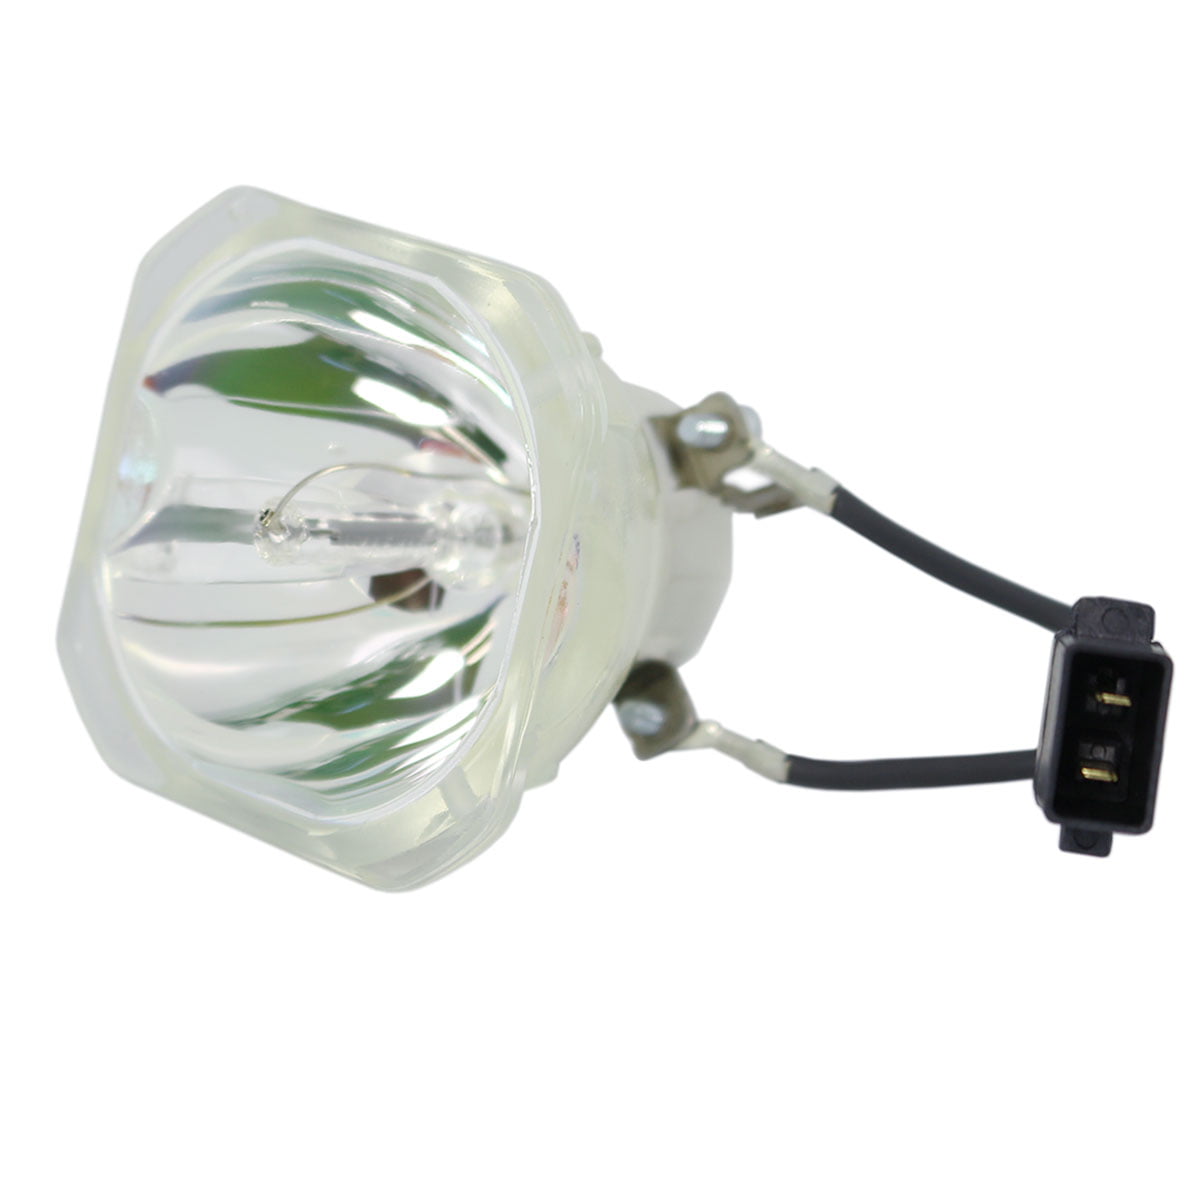 Original Osram Projector Lamp Replacement for Epson ELPLP77 Bulb Only 